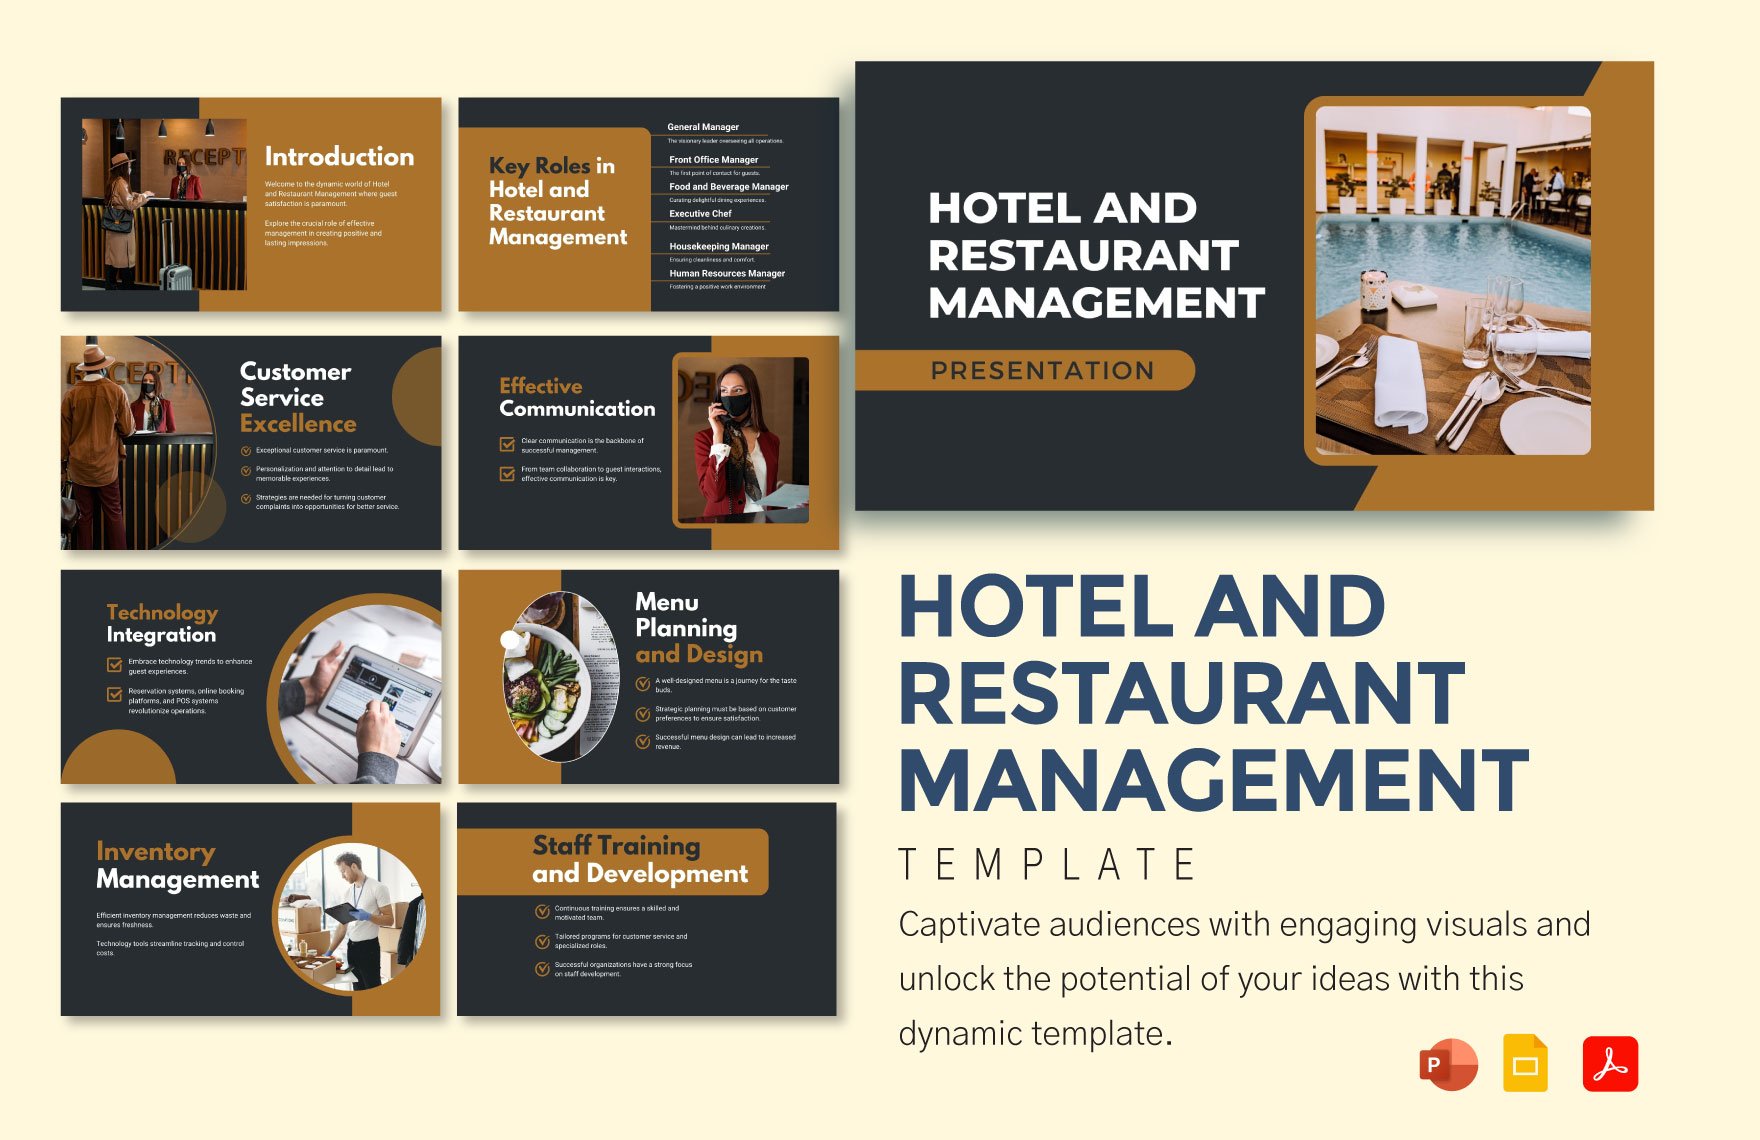 Hotel and Restaurant Management Template